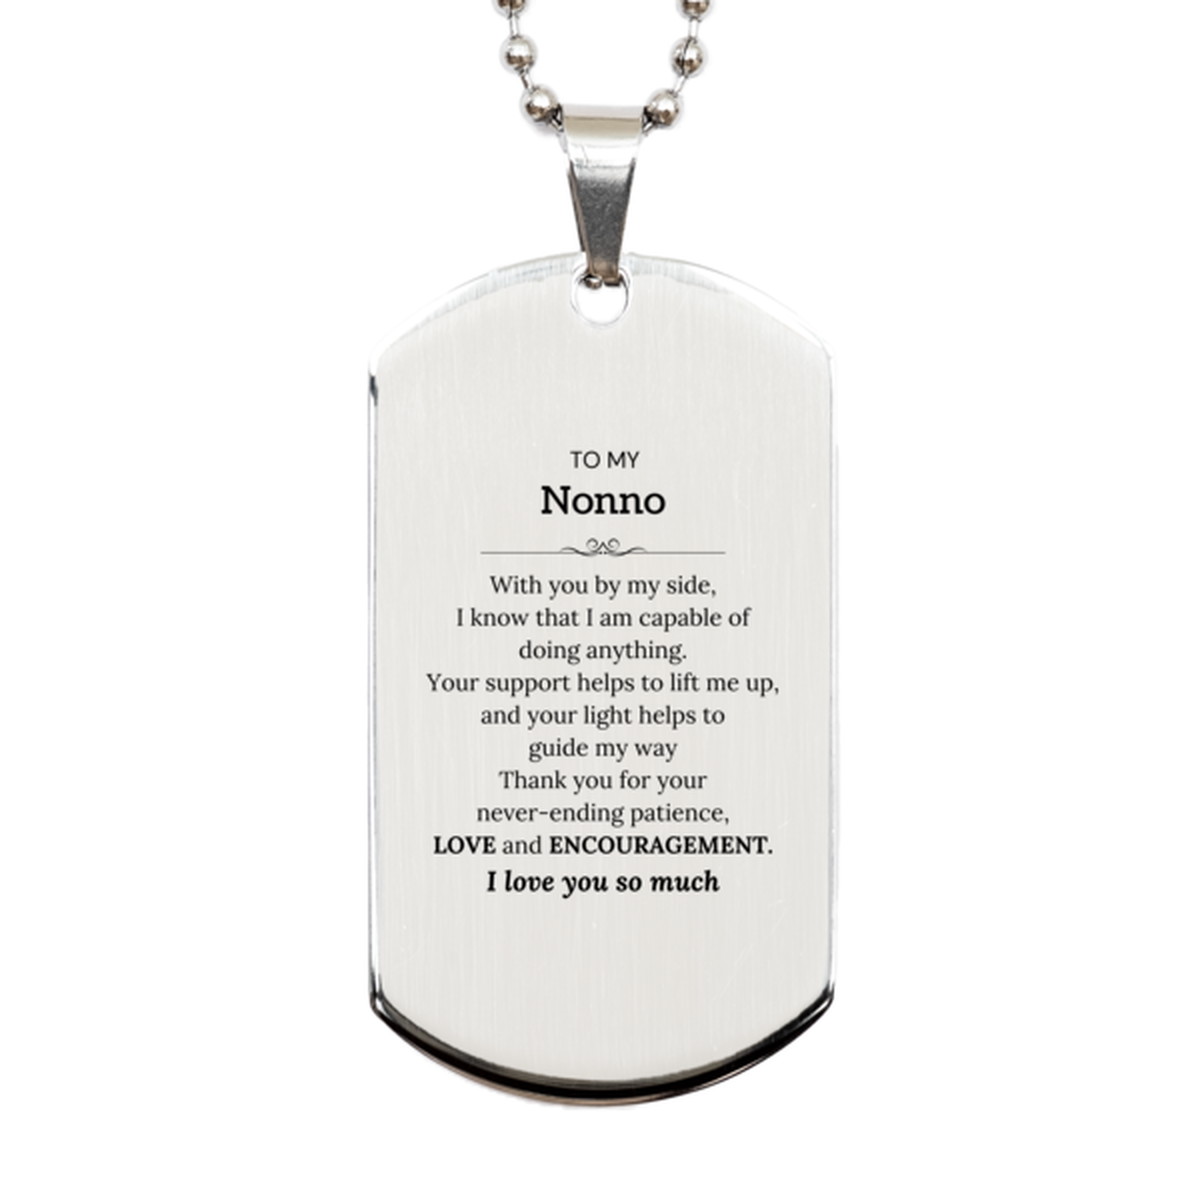 Appreciation Nonno Silver Dog Tag Gifts, To My Nonno Birthday Christmas Wedding Keepsake Gifts for Nonno With you by my side, I know that I am capable of doing anything. I love you so much